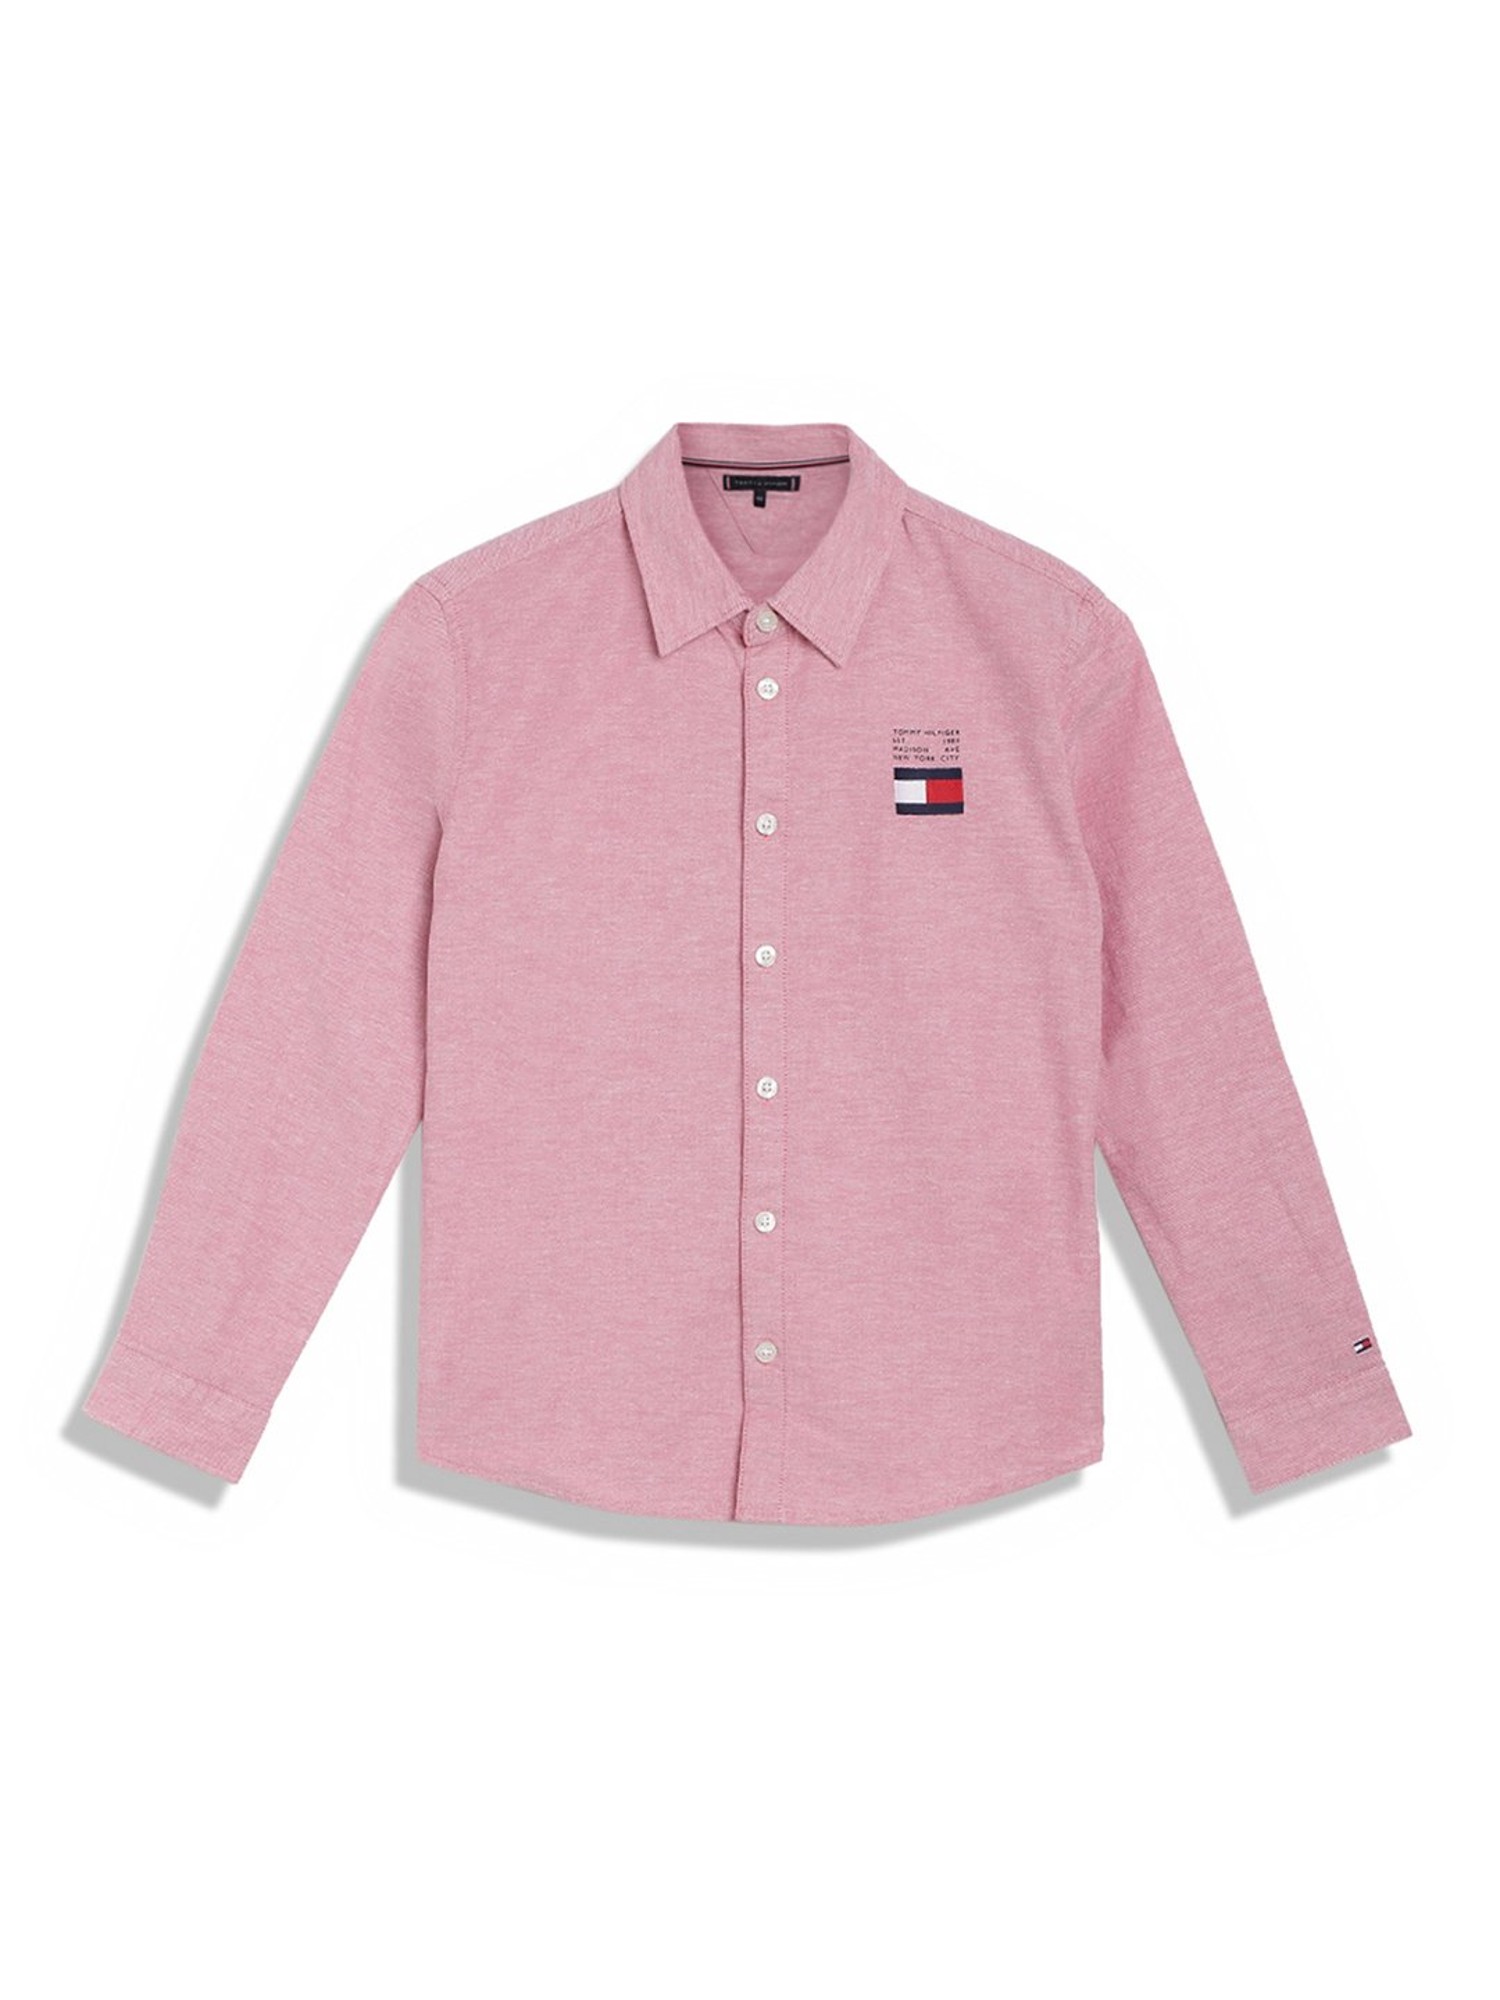 Tommy Hilfiger Kids Pink Shirt Solid Sleeves Full